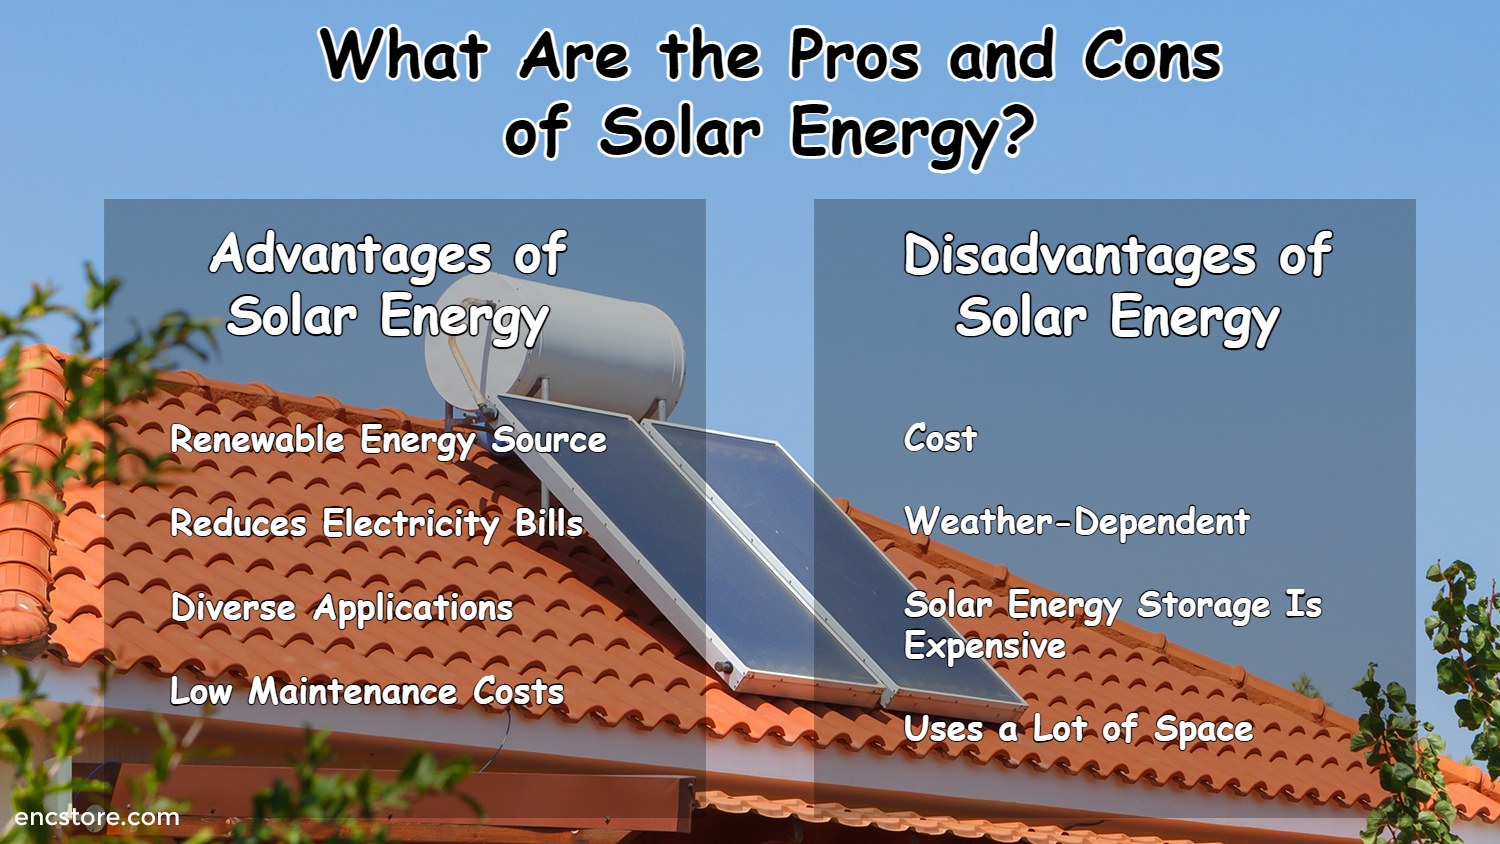 What Are the Pros and Cons of Solar Energy?